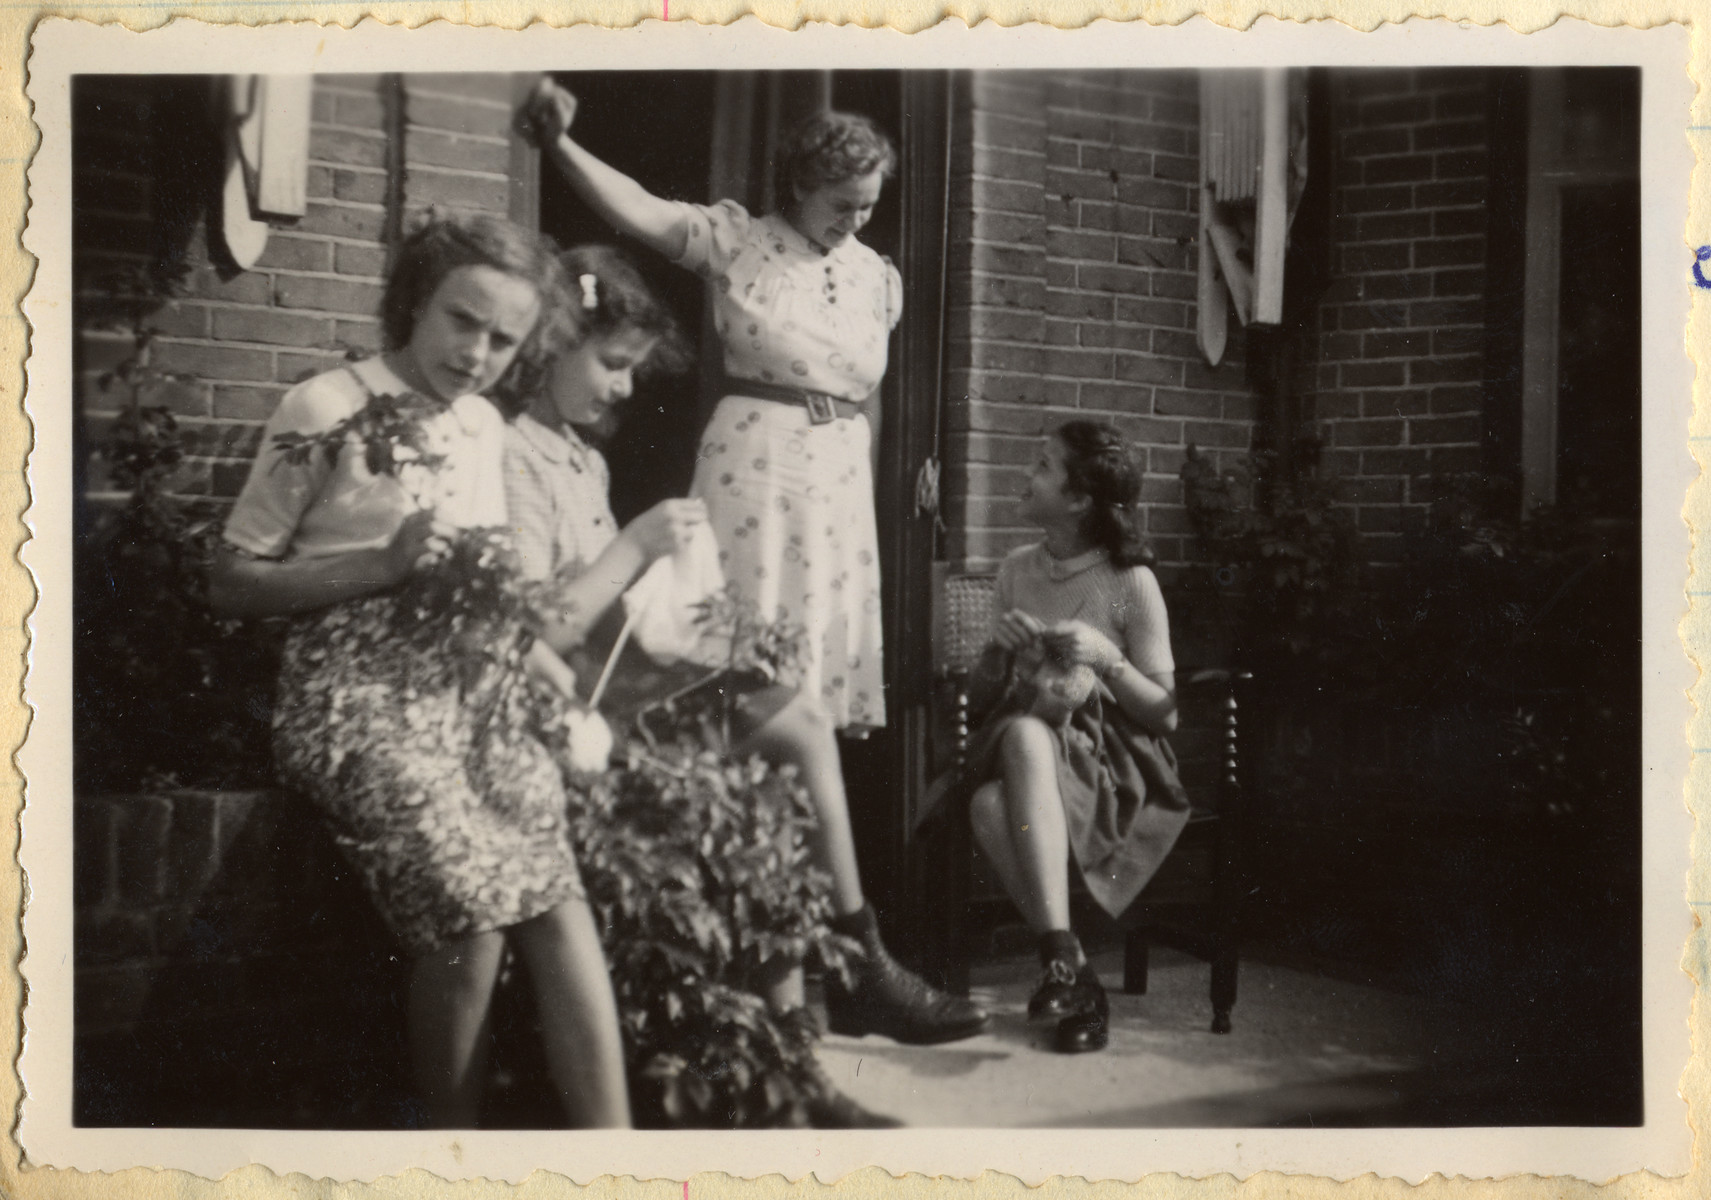 Jacqueline (second from left) and Manuela Mendels (far right) knit outside their uncle's home in Hilversum.